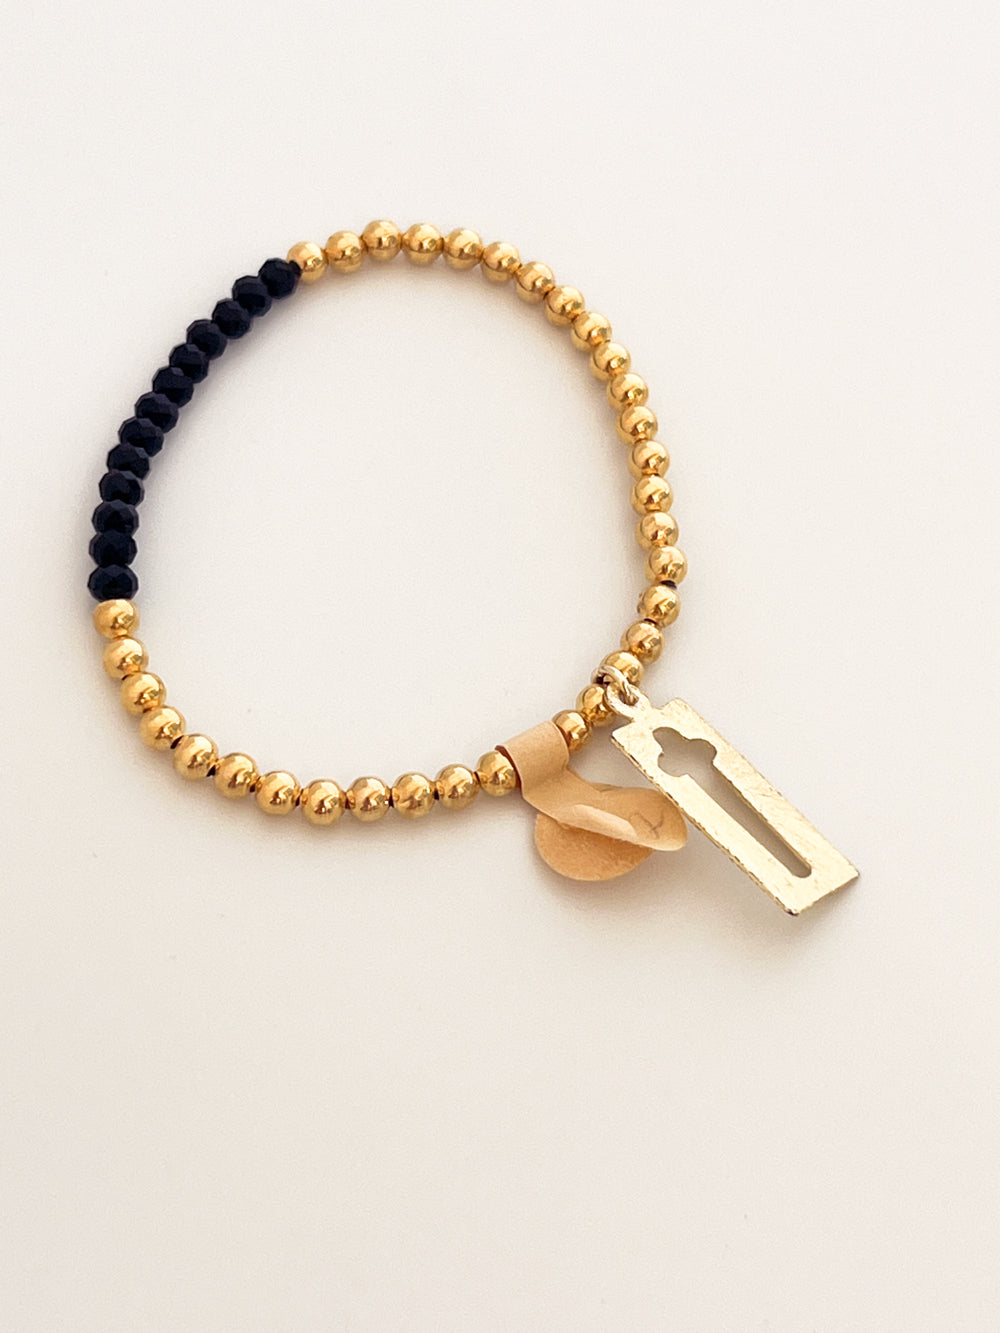 Gold Beaded Bracelet with Cross Accent